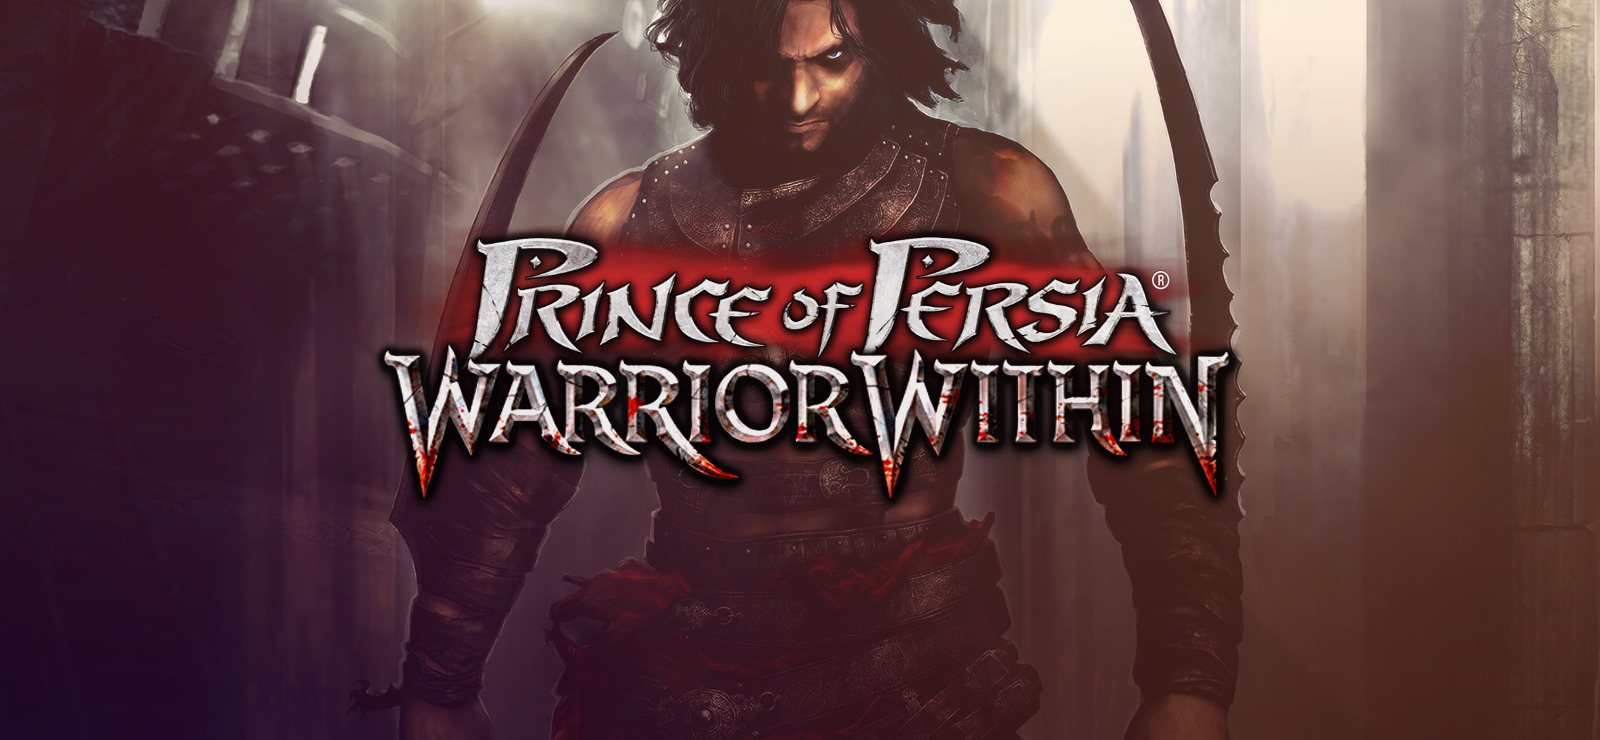 Prince of persia warrior within steam фото 55